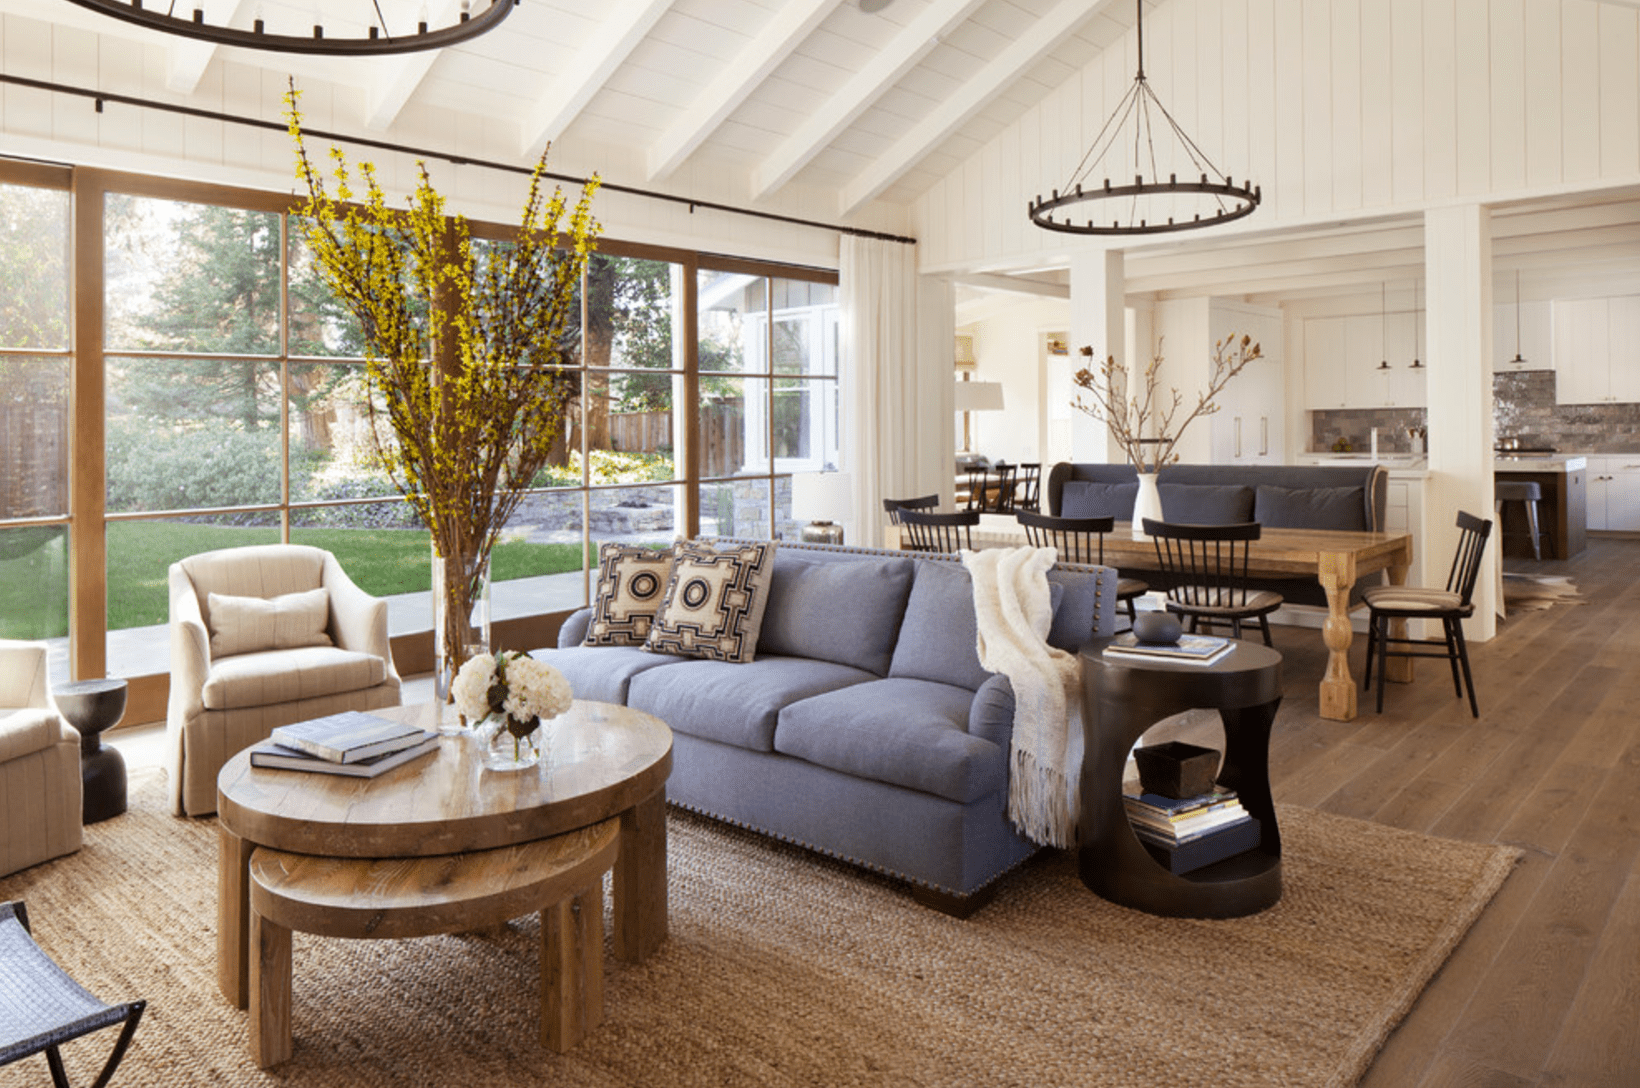 Four Season Rooms with Fireplaces Beautiful 15 Farmhouse Style Living Room Tips